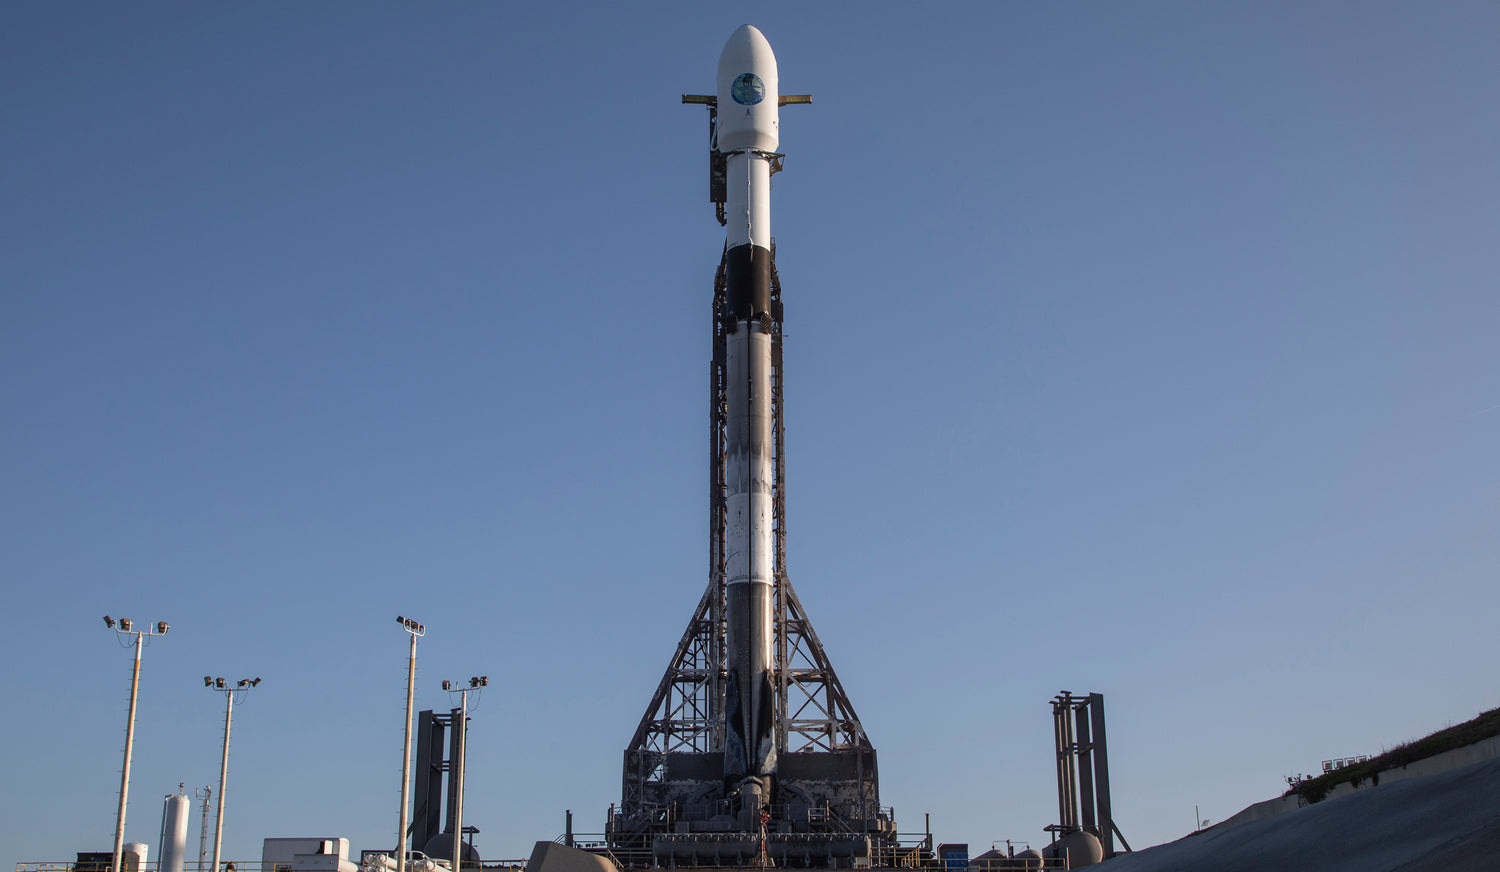 SpaceX Falcon 9 will launch United States surveillance satellites from Vandenberg Space Force Base –Watch It Live!